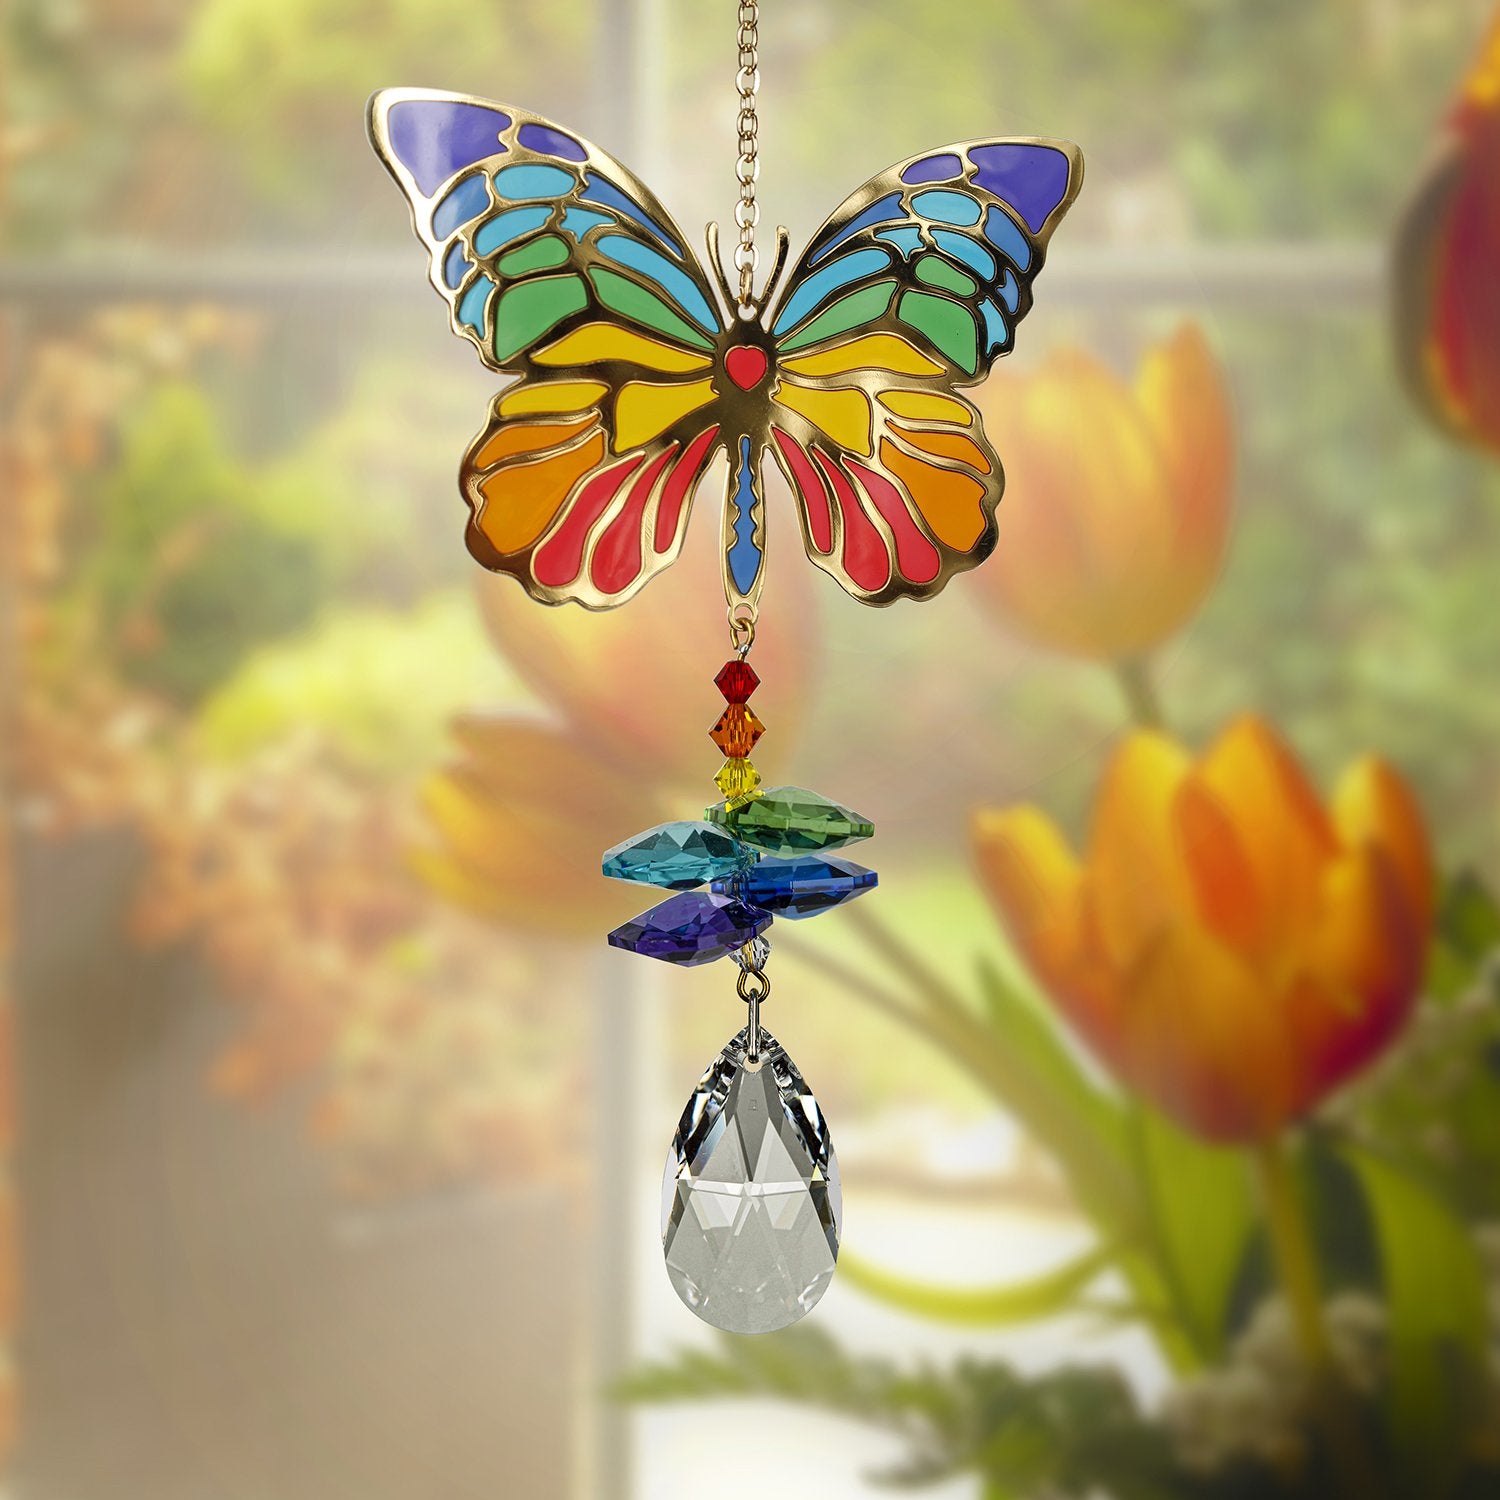 Crystal Wonders - Butterfly lifestyle image